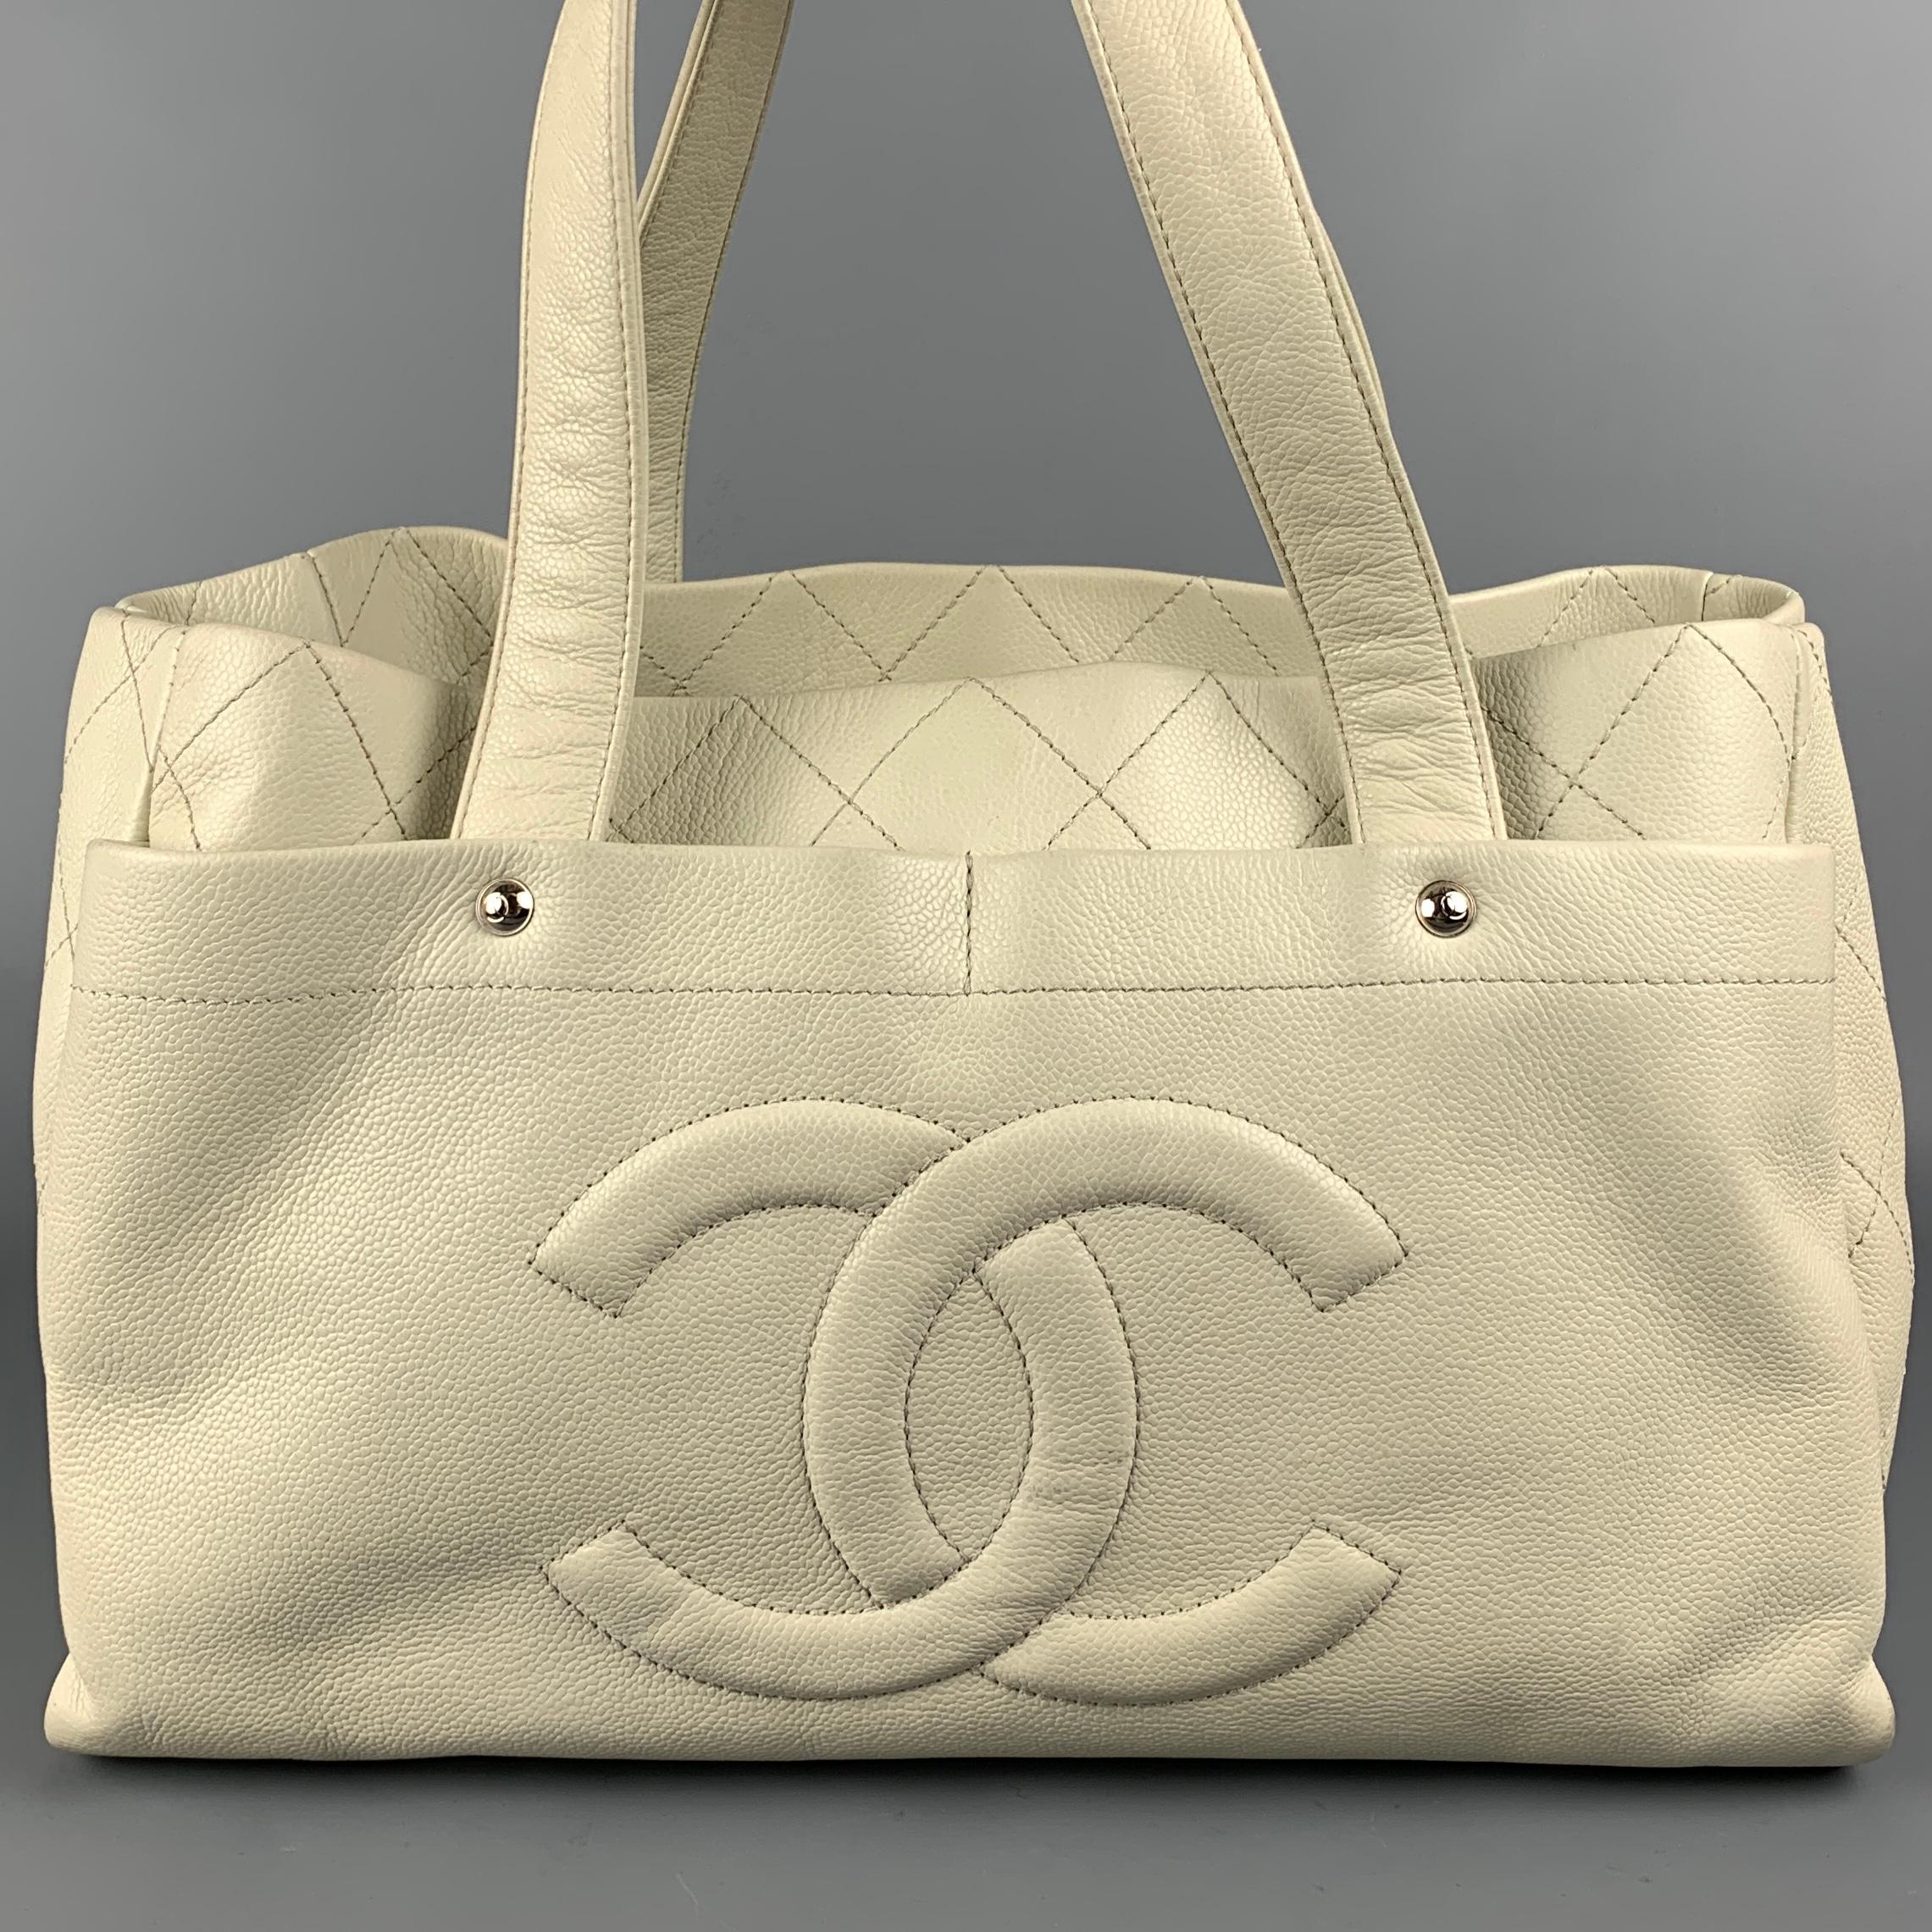 CHANEL handbag comes in a ivory quilted leather featuring double top handles, front & back double pockets, inner slots, silver tone hardware, front logo detail, and a snap button closure. Includes dust bag and cosmetic case. Made in France.

Very